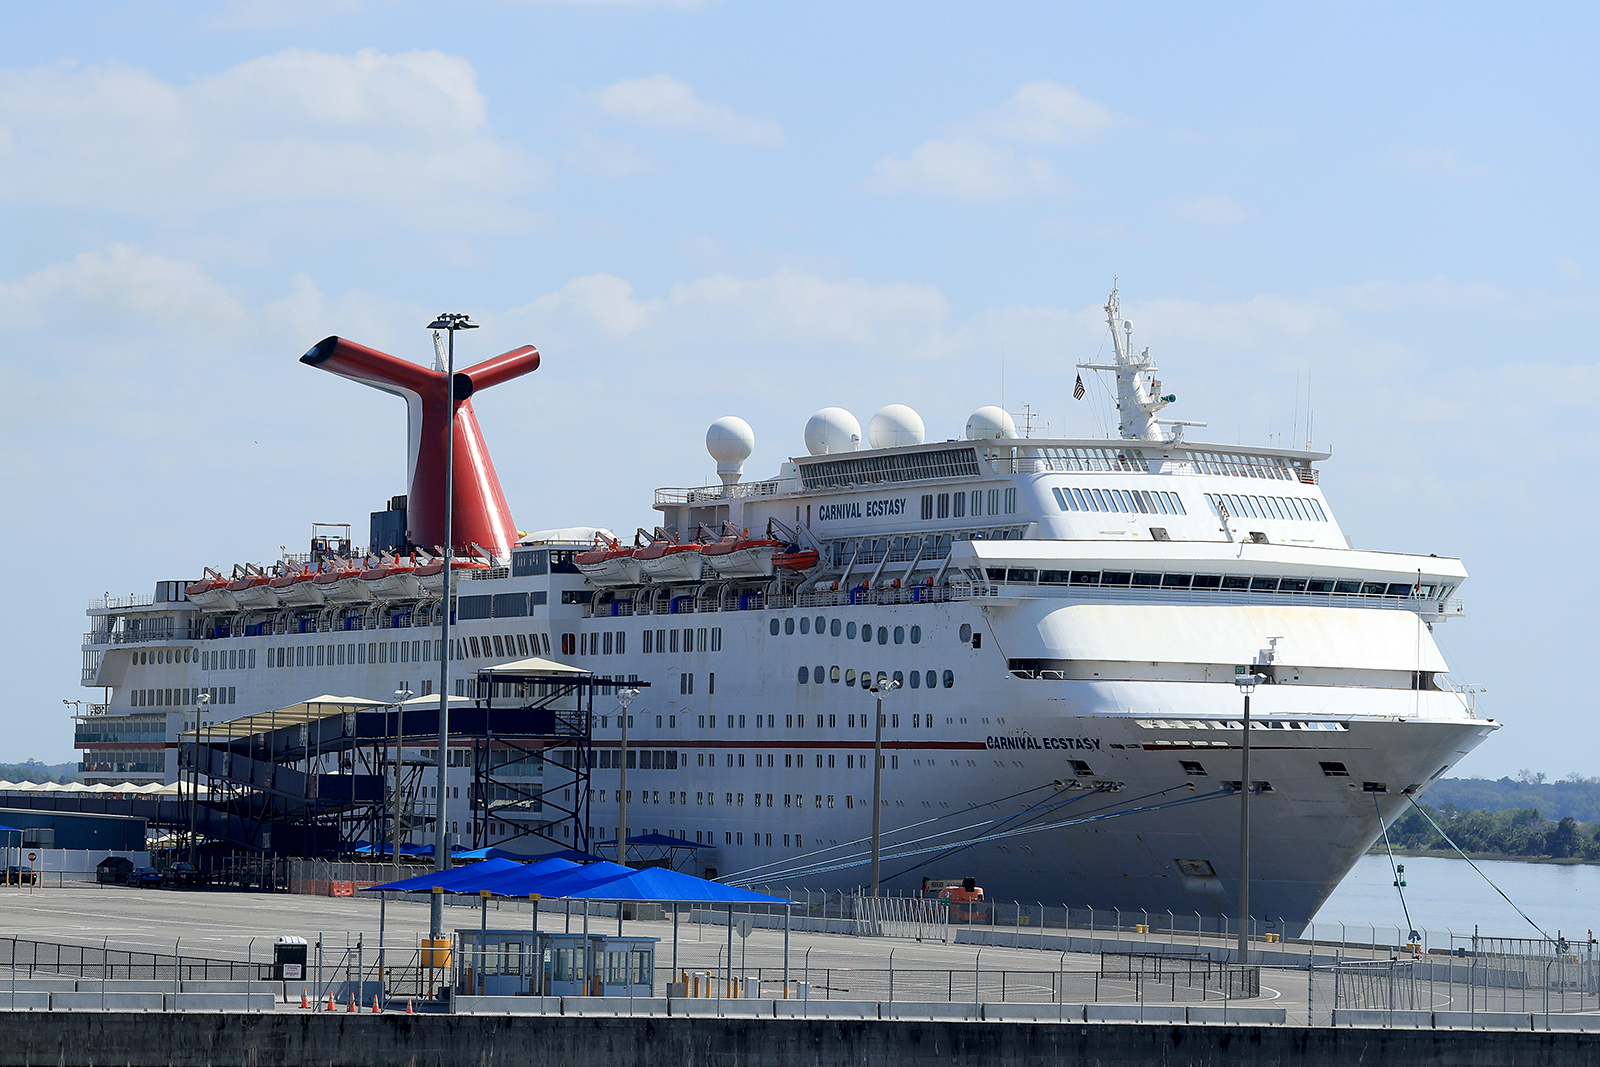 Carnival Cruise Line's Carnival Ecstacy cruise ship is docked at the Port of Jacksonville during the coronavirus outbreak on March 27 in Jacksonville, Florida.